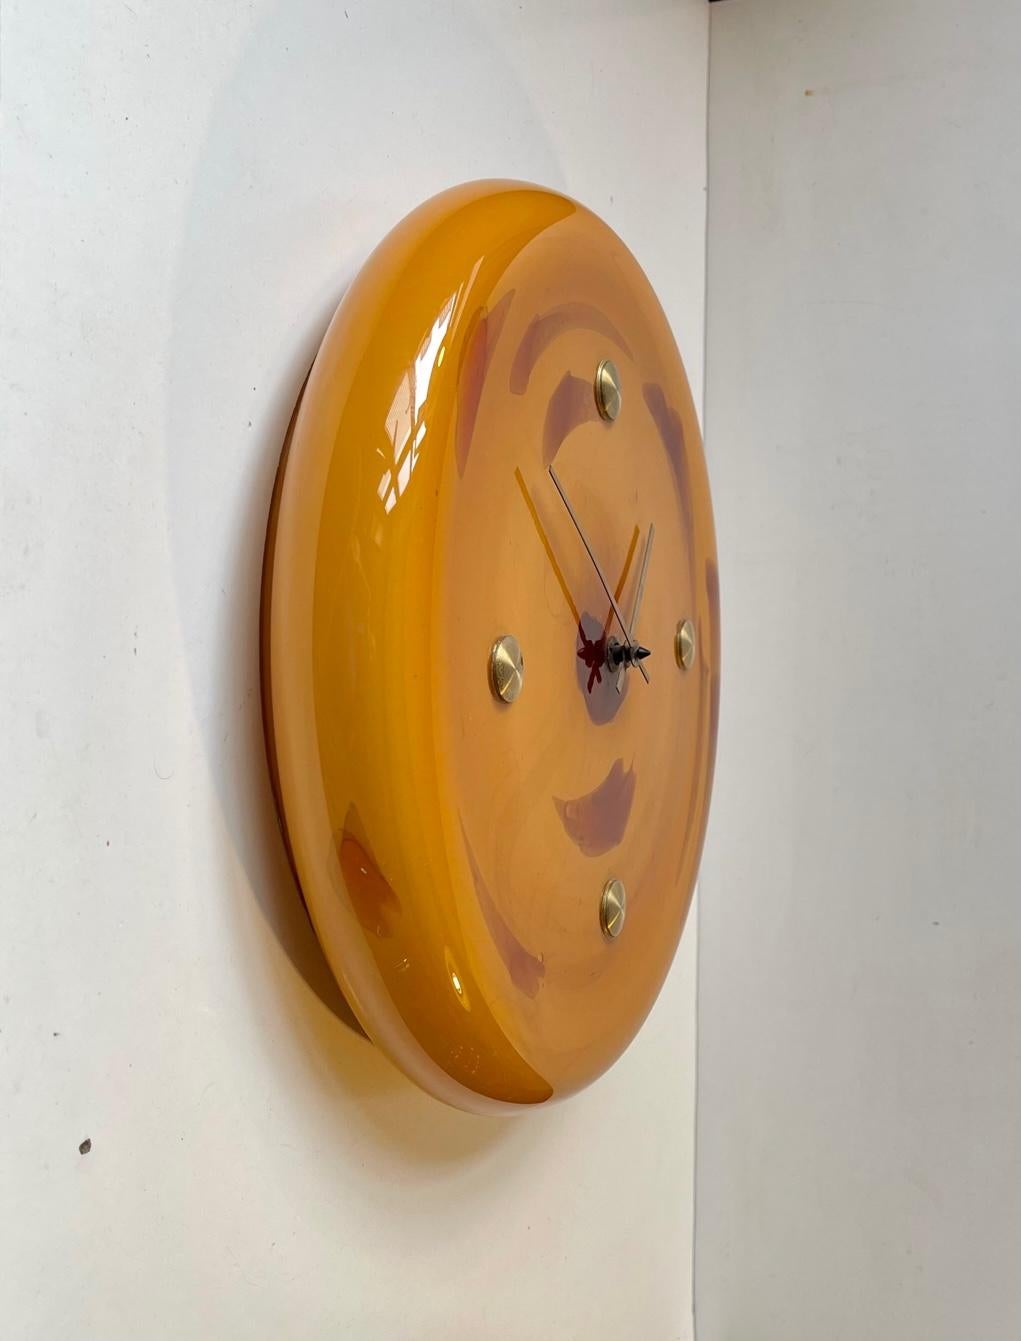 A very rare wall clock in caramel marble glass. Designed by female designer Sidse Werner in the mid 1970s. It is called President Wall Clock and this one is the largest in the series measuring 32 cm I diameter. It features over-sized brass dots at